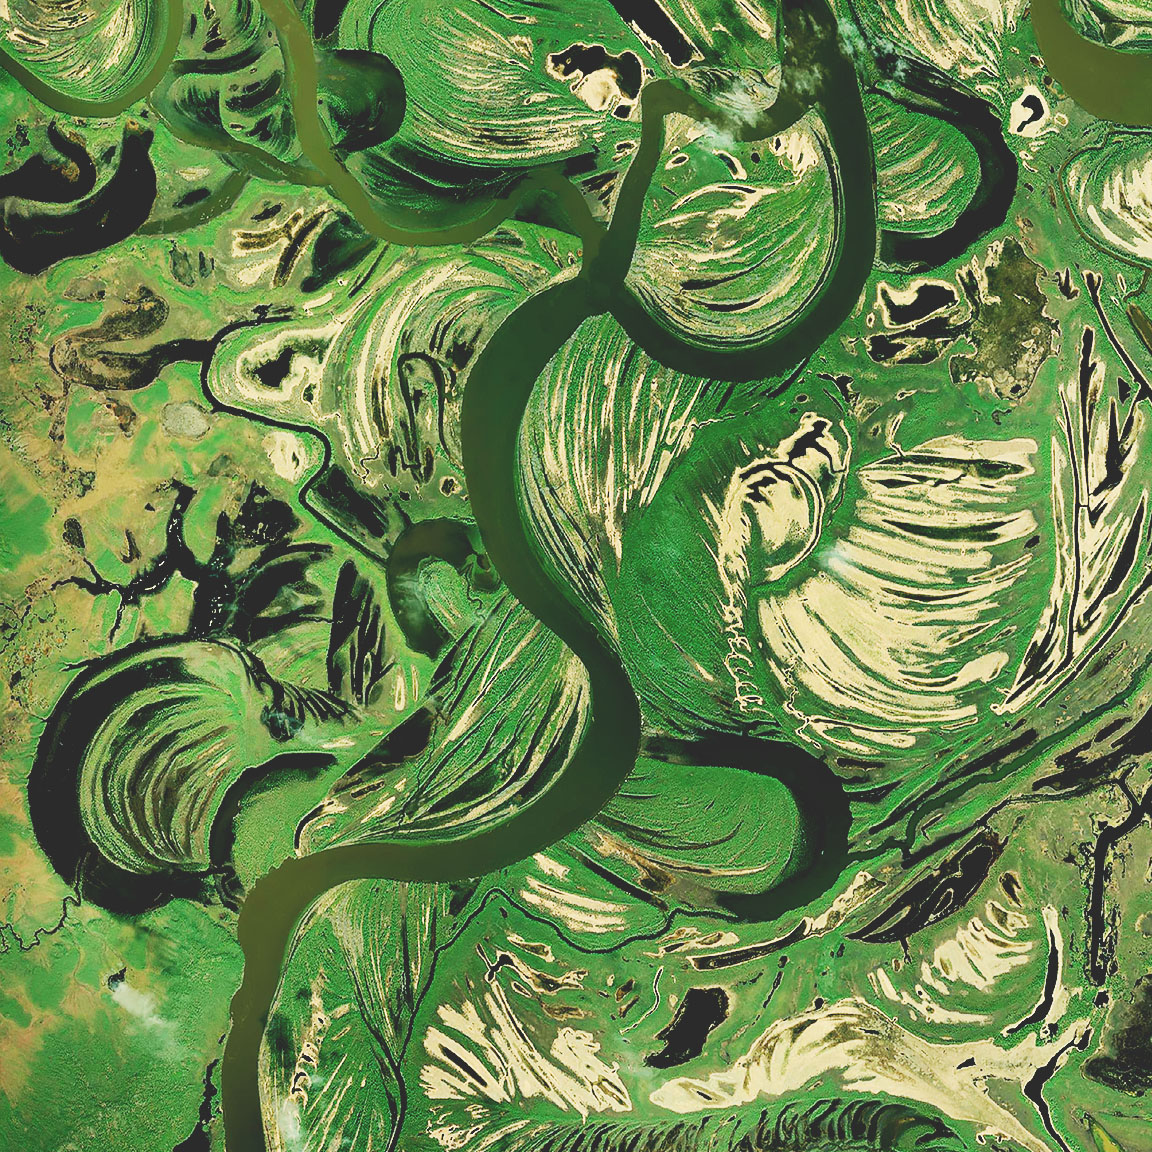 Satellite imagery of wetlands shows a dark green river curving through brown and bright green marshes